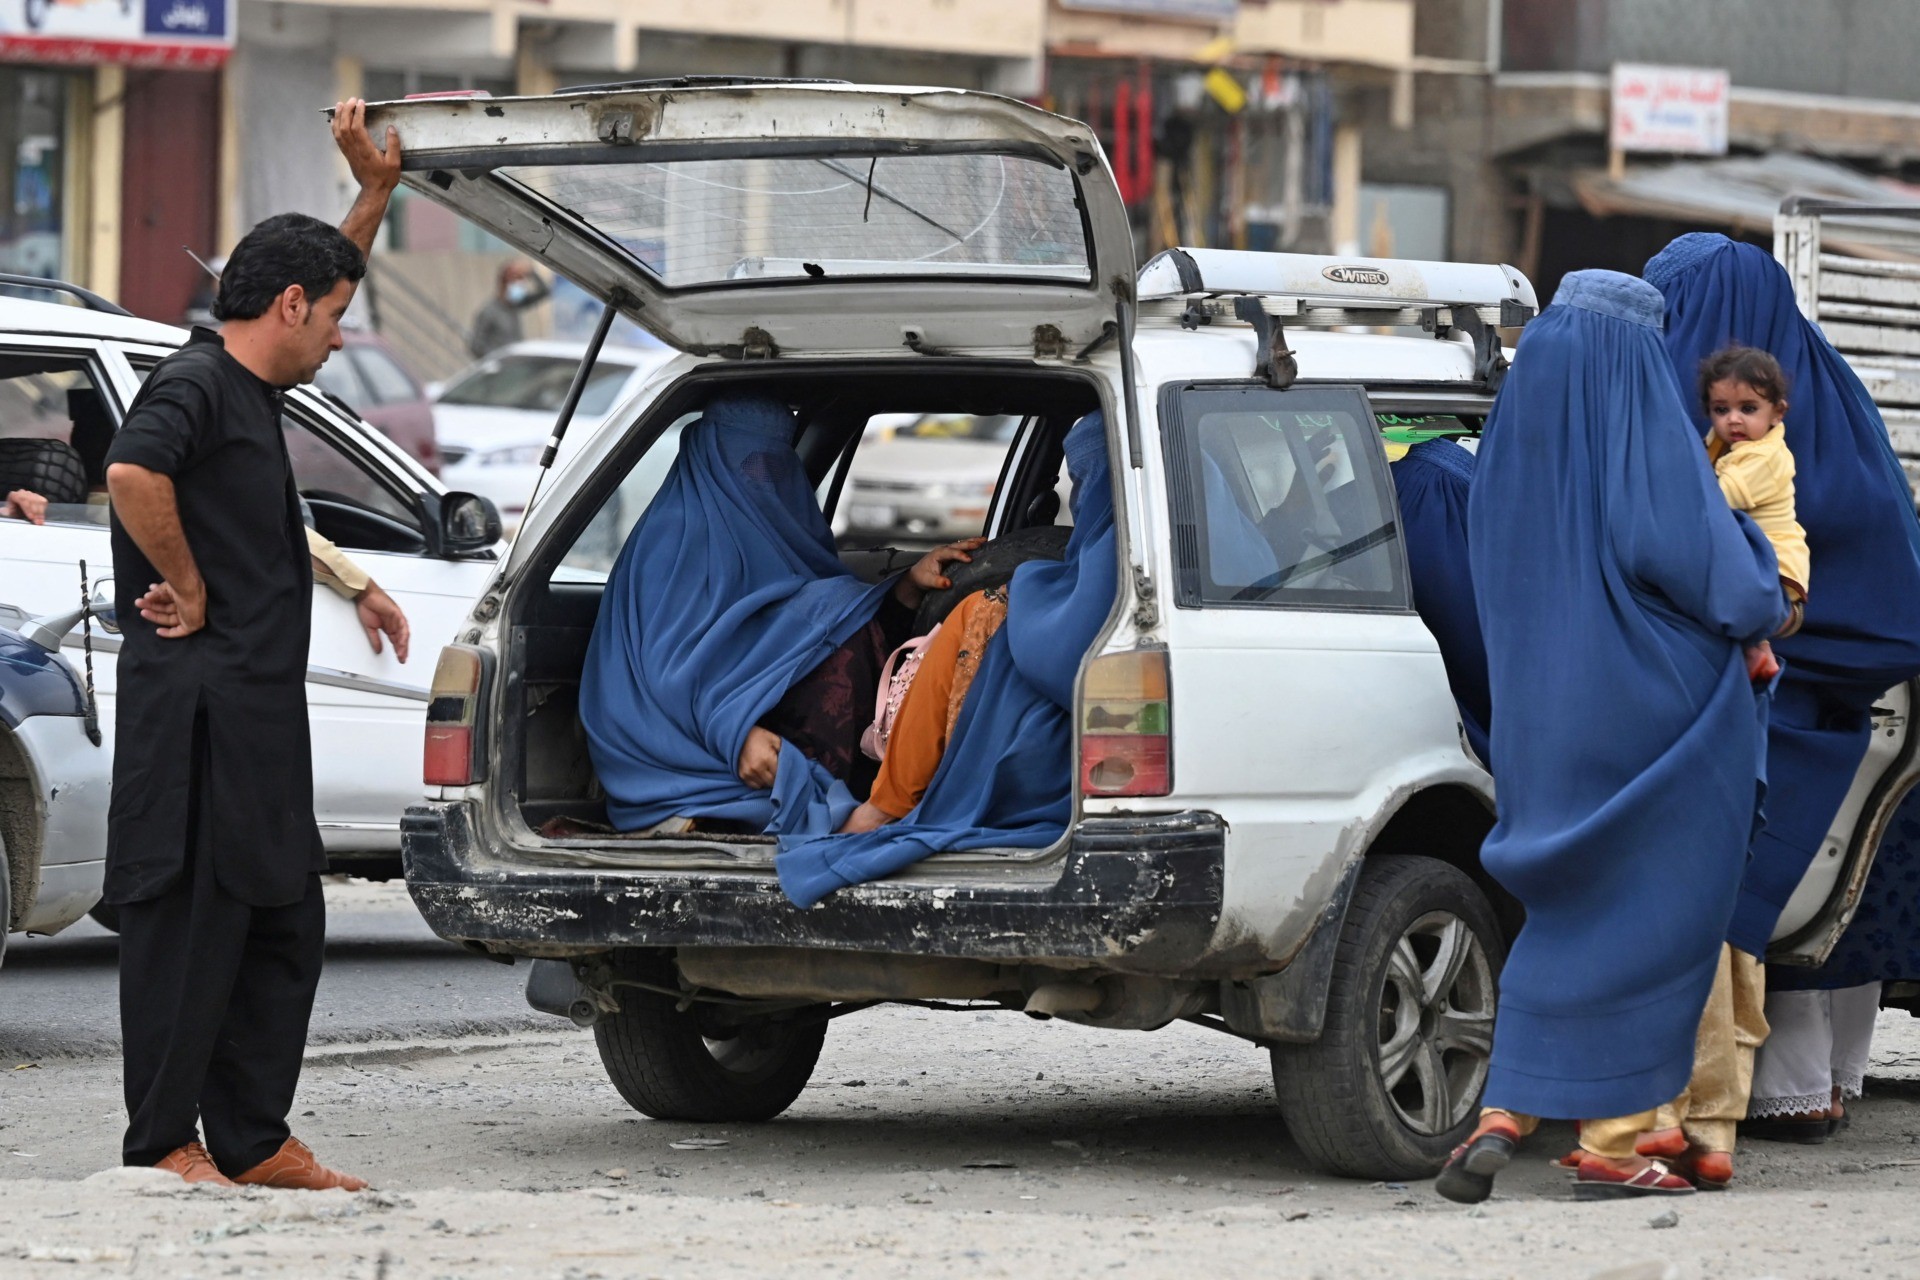 Women wearing a burqa get into a local taxi in Kabul on July 31, 2021. (Photo by SAJJAD HUSSAIN / AFP) (Photo by SAJJAD HUSSAIN/AFP via Getty Images)